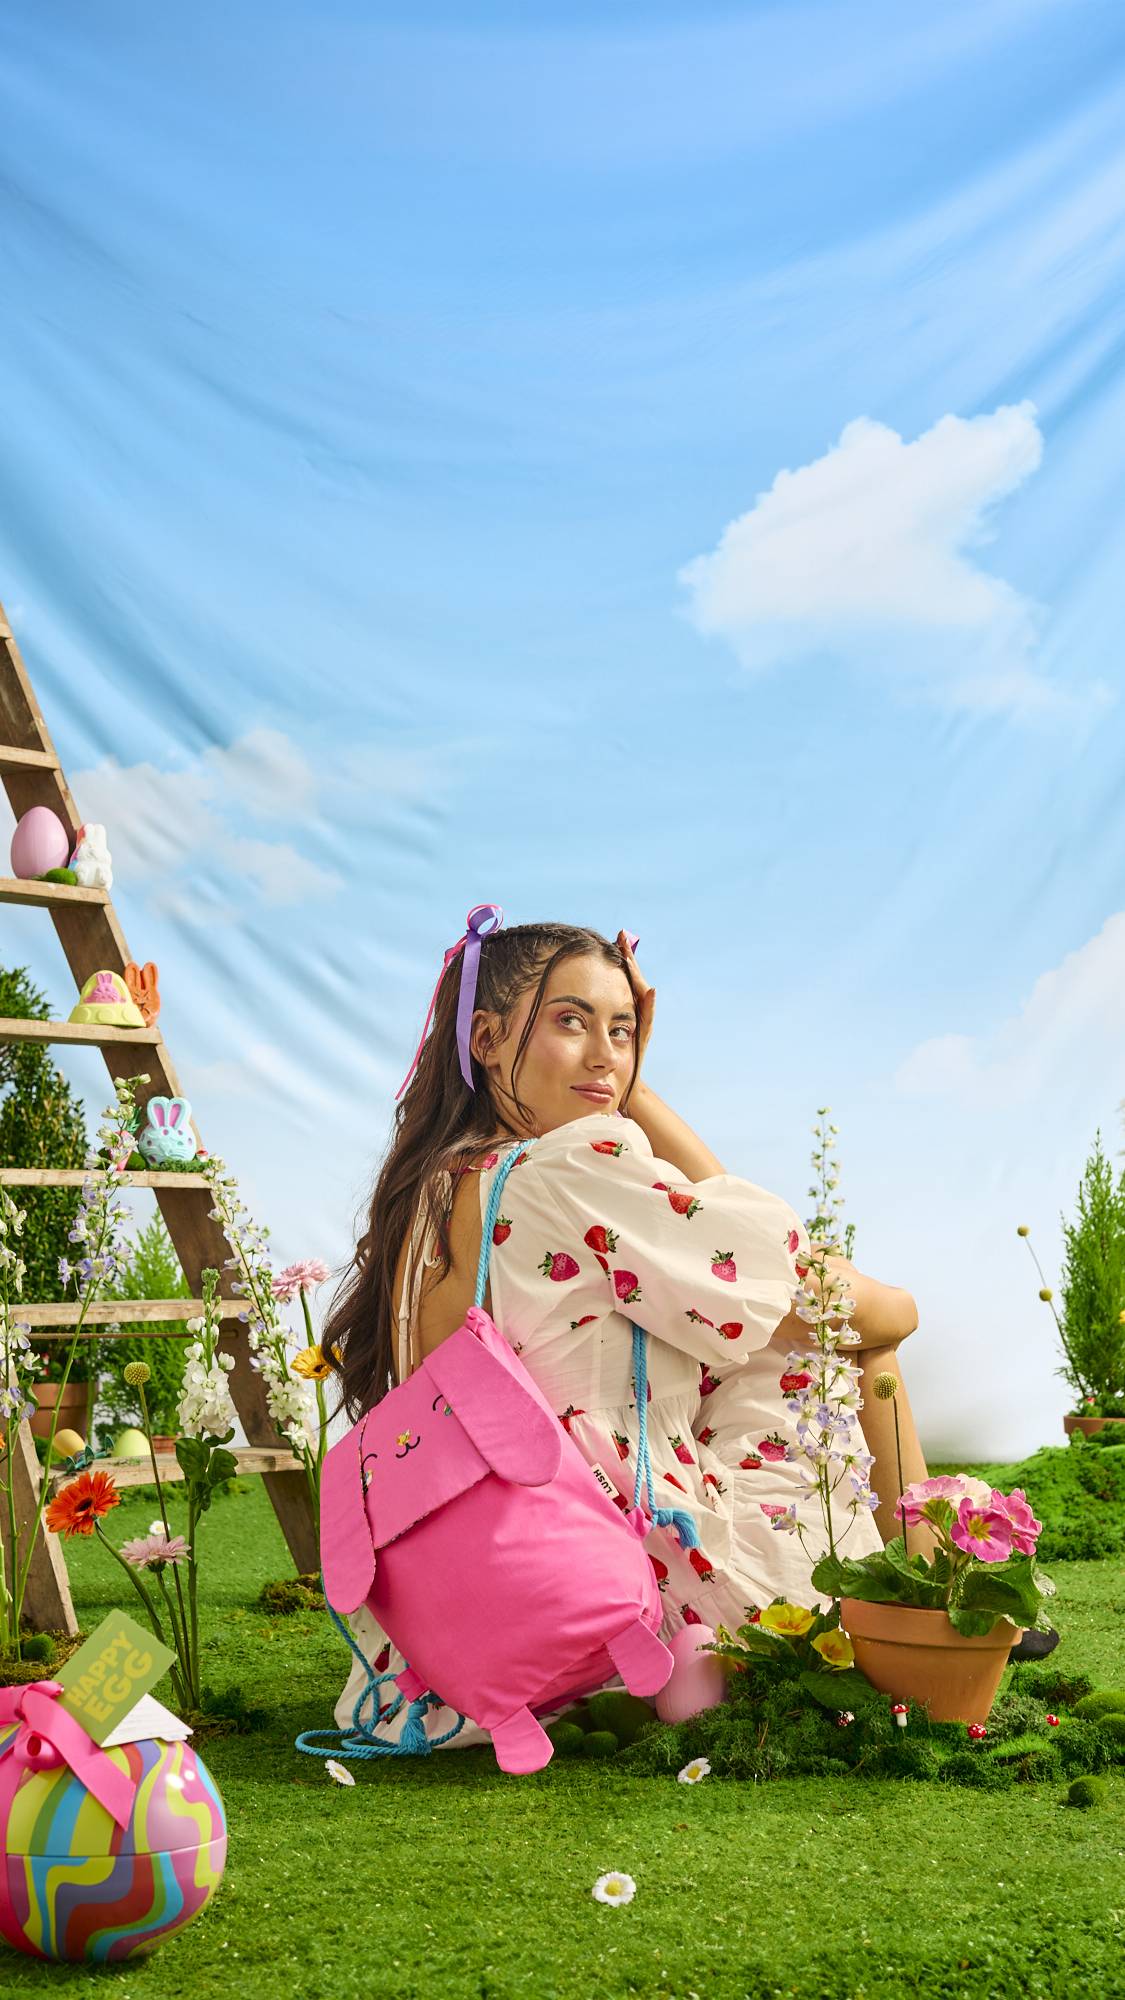 The model is sitting, next to a wooden ladder, in a white dress with strawberry decoration and they are wearing the Flower Bunny gift pink backpack over one shoulder.